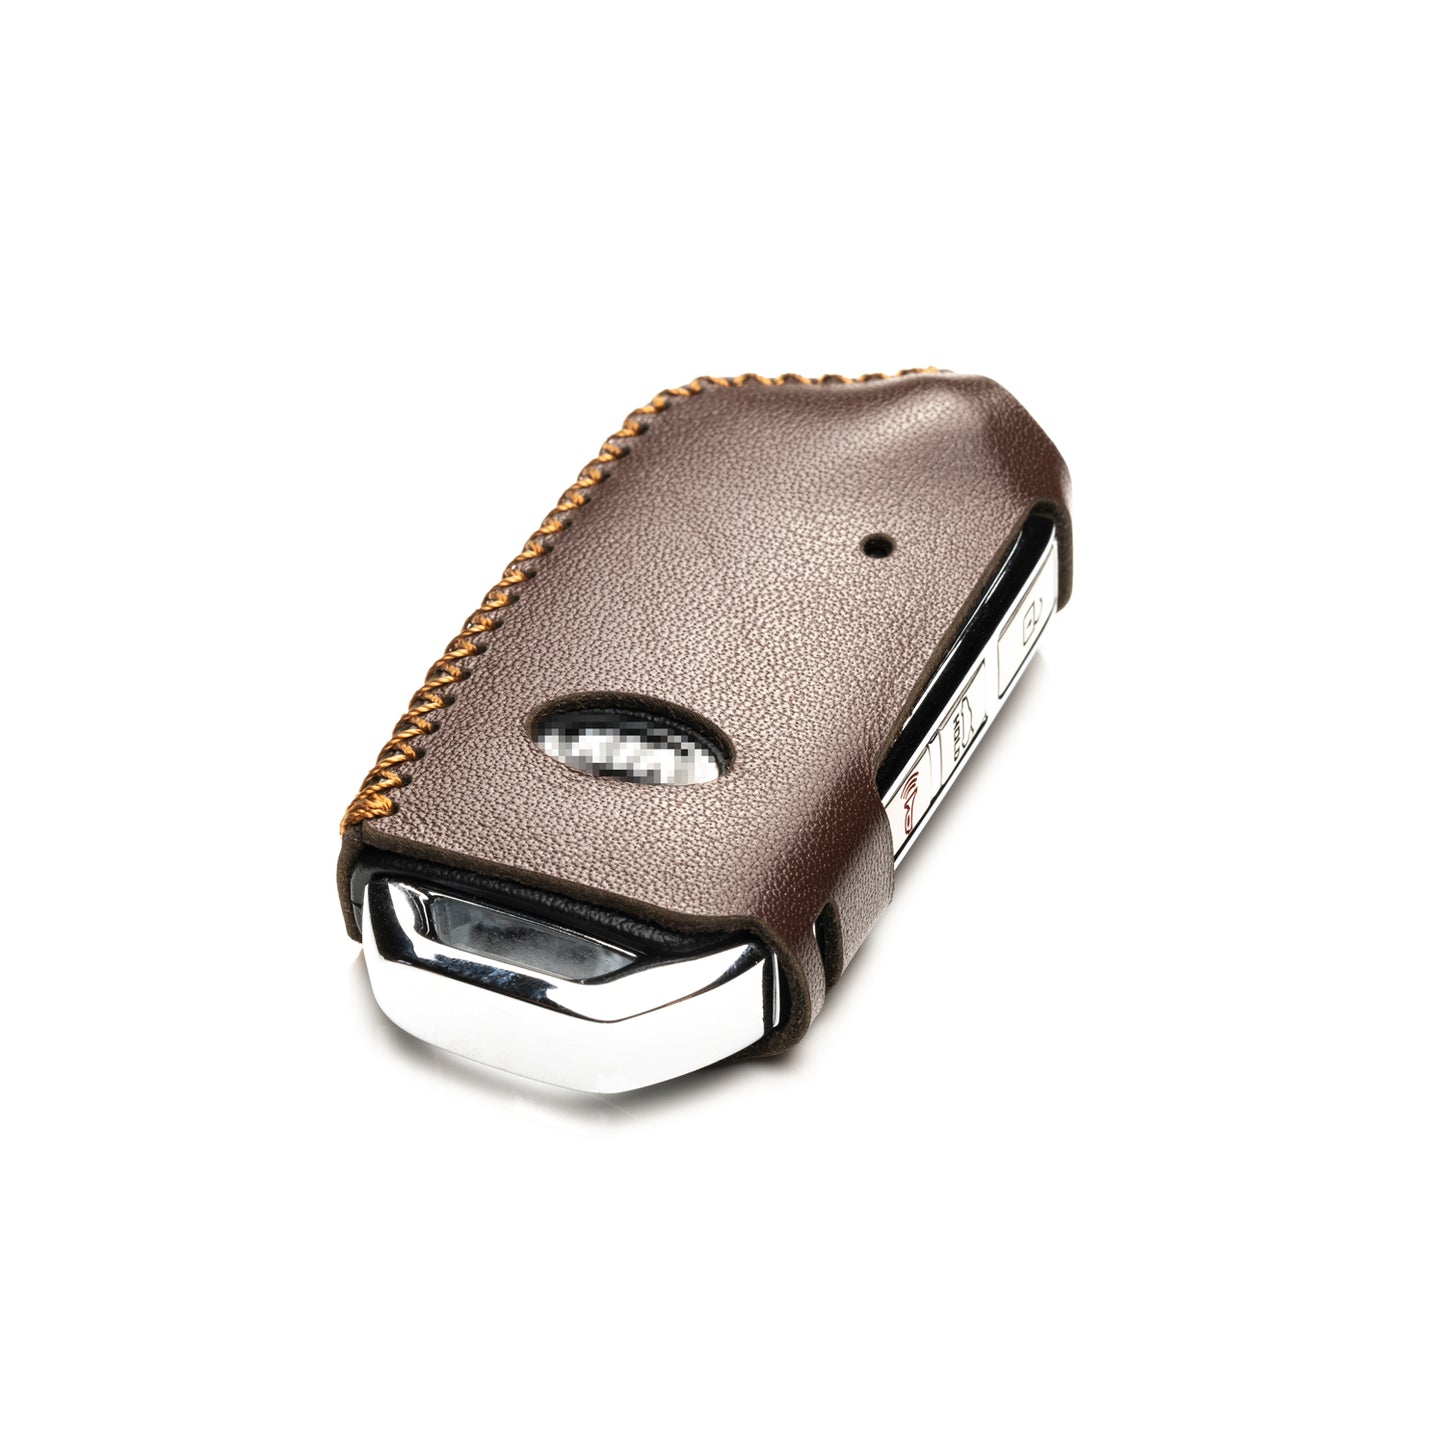 Vitodeco Genuine Leather Smart Key Fob Case Cover Compatible with Kia Stinger 2019-2022